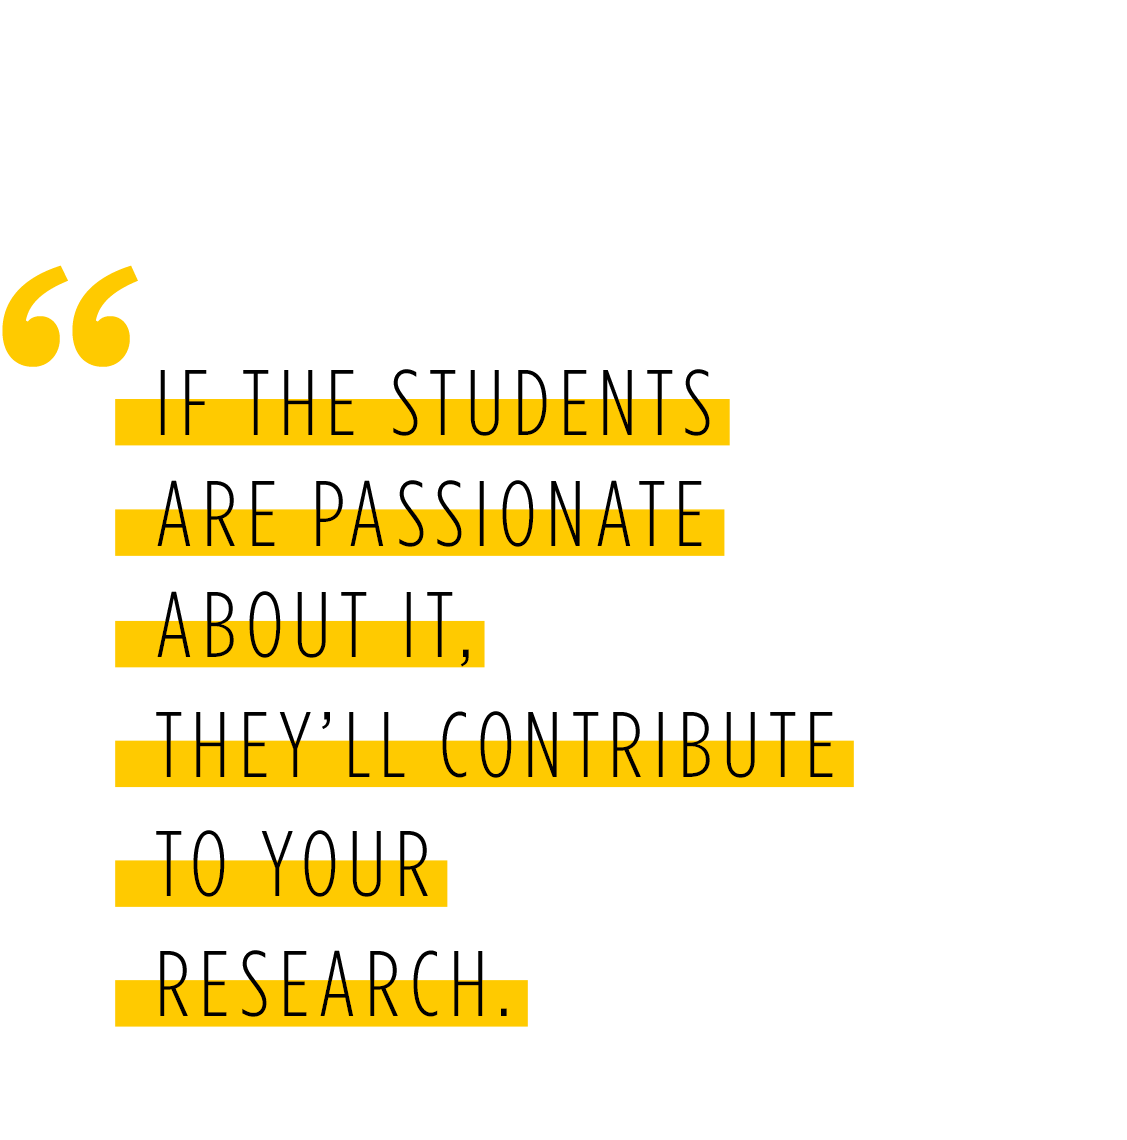 If the students are passionate about it, they'll contribute to your research